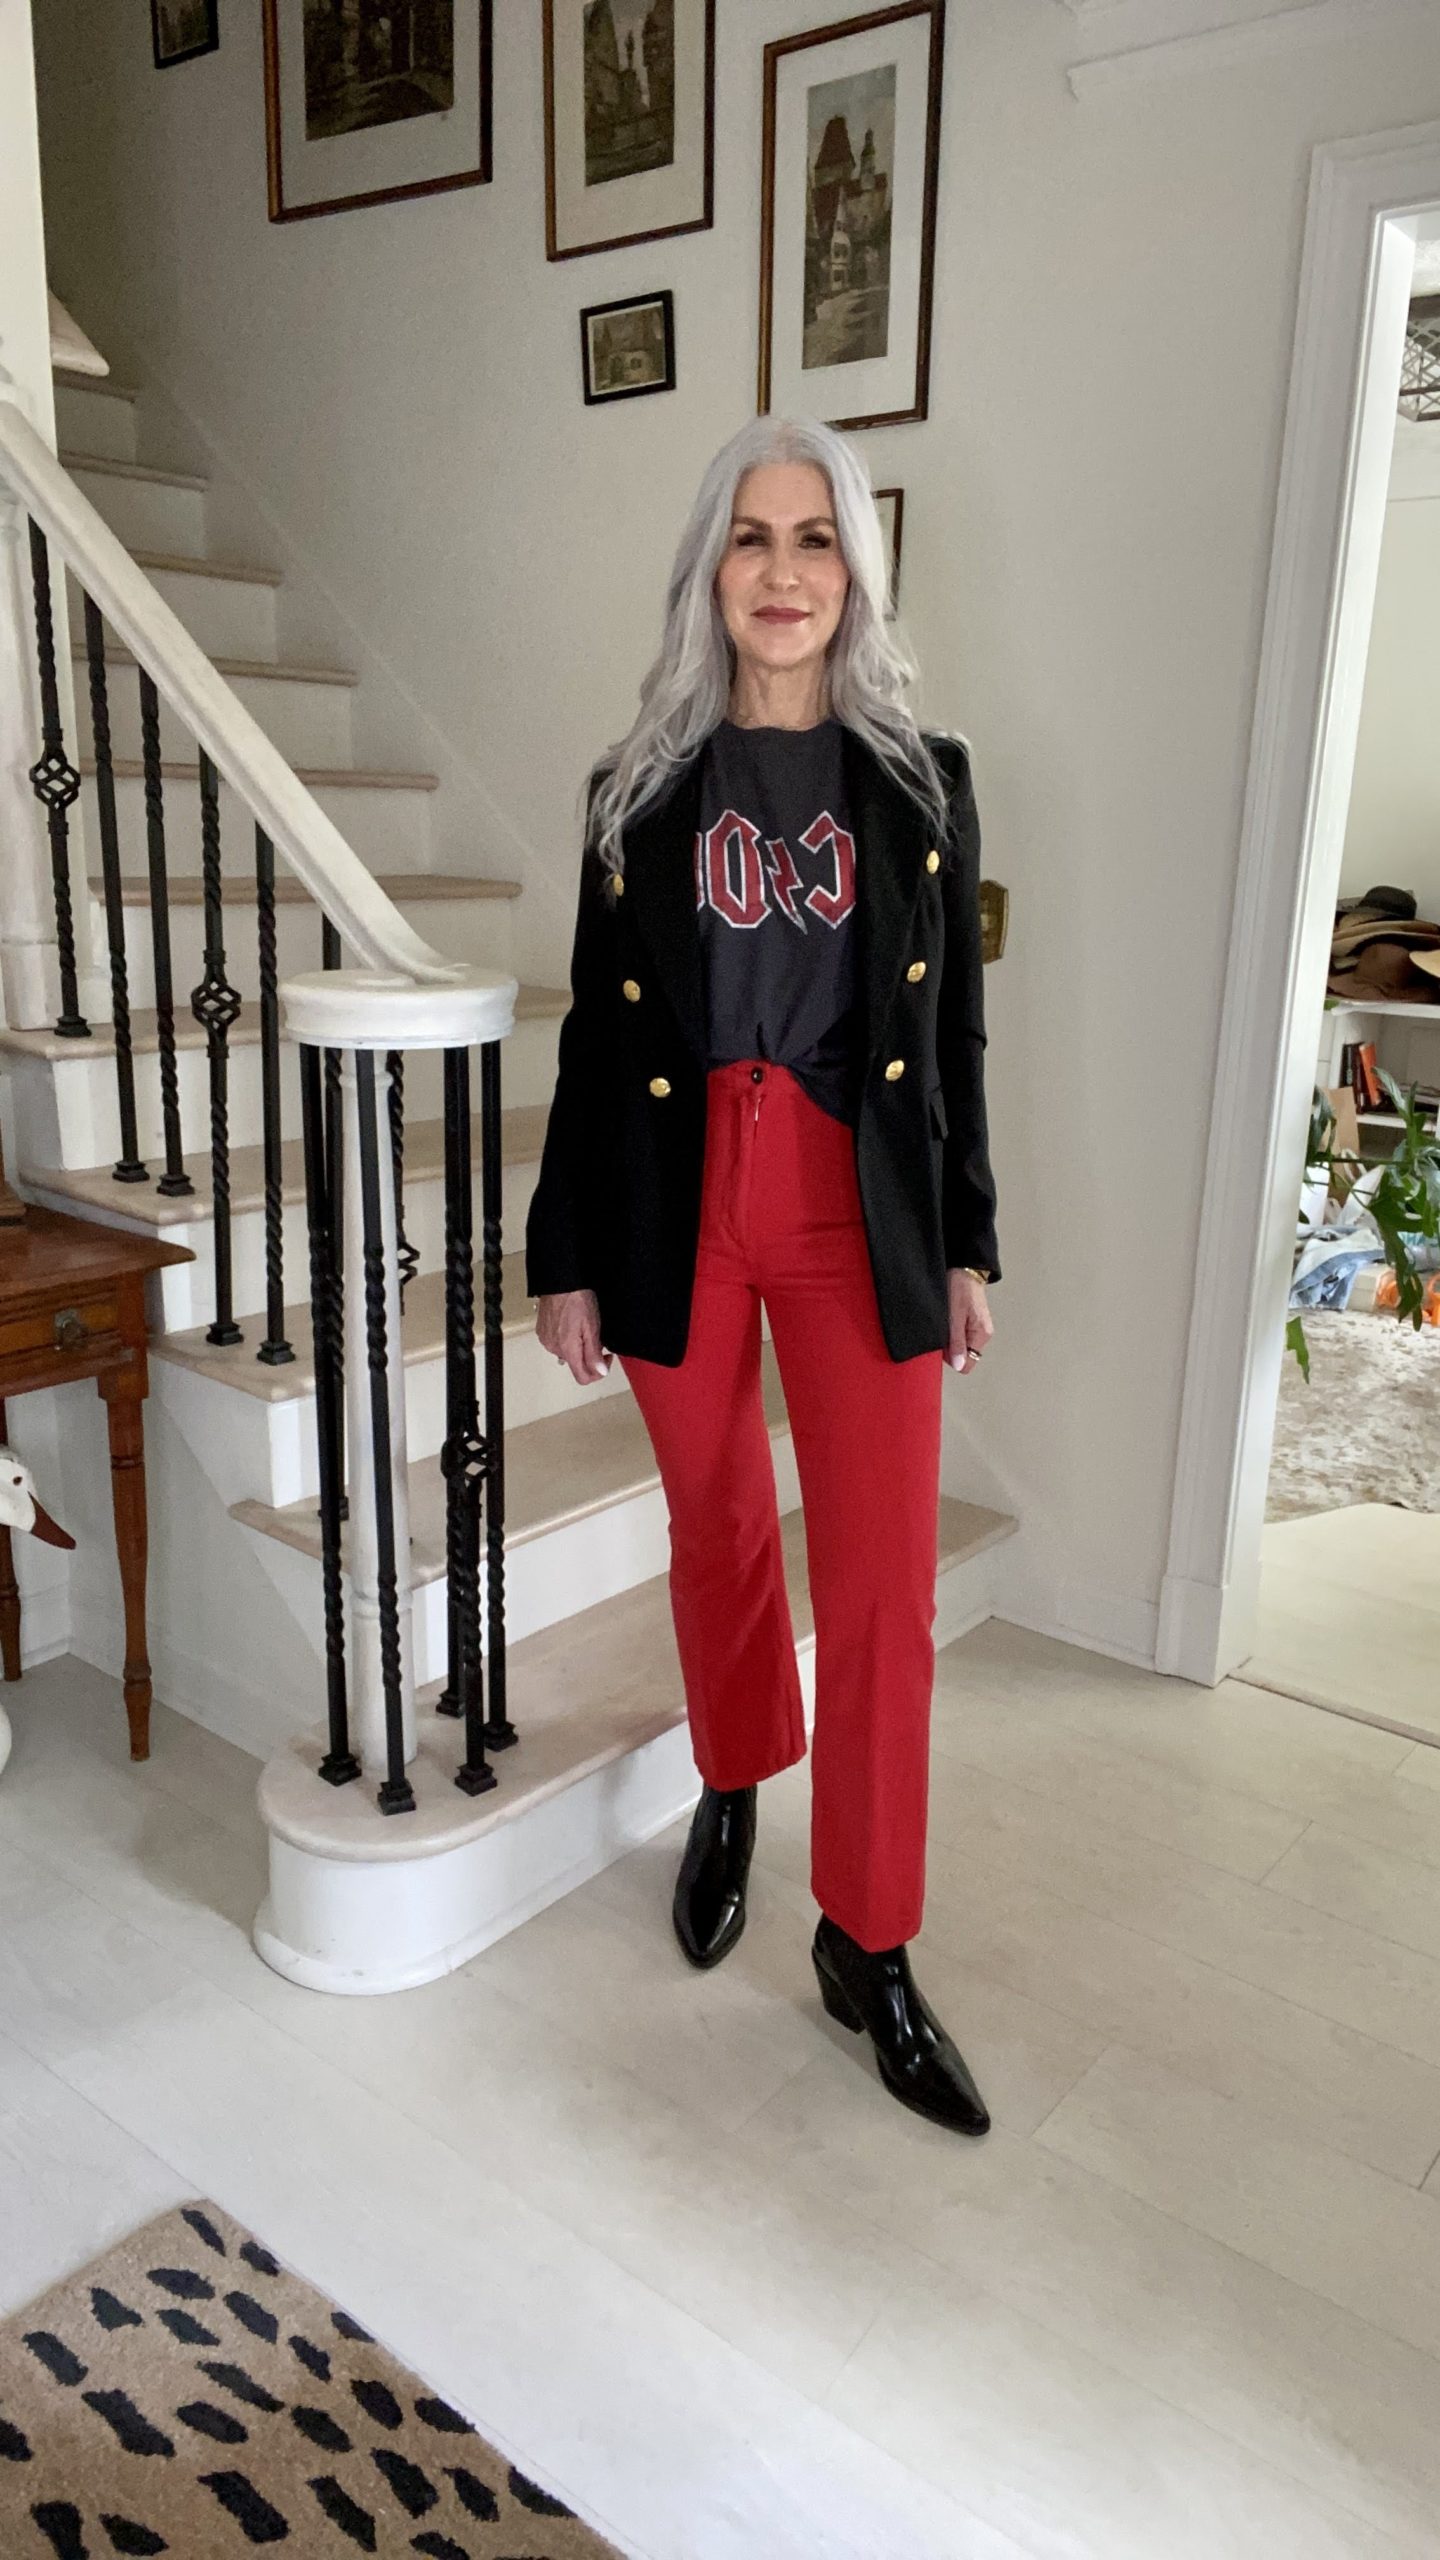 silver hair lady wearing rock n roll shirt and red pants